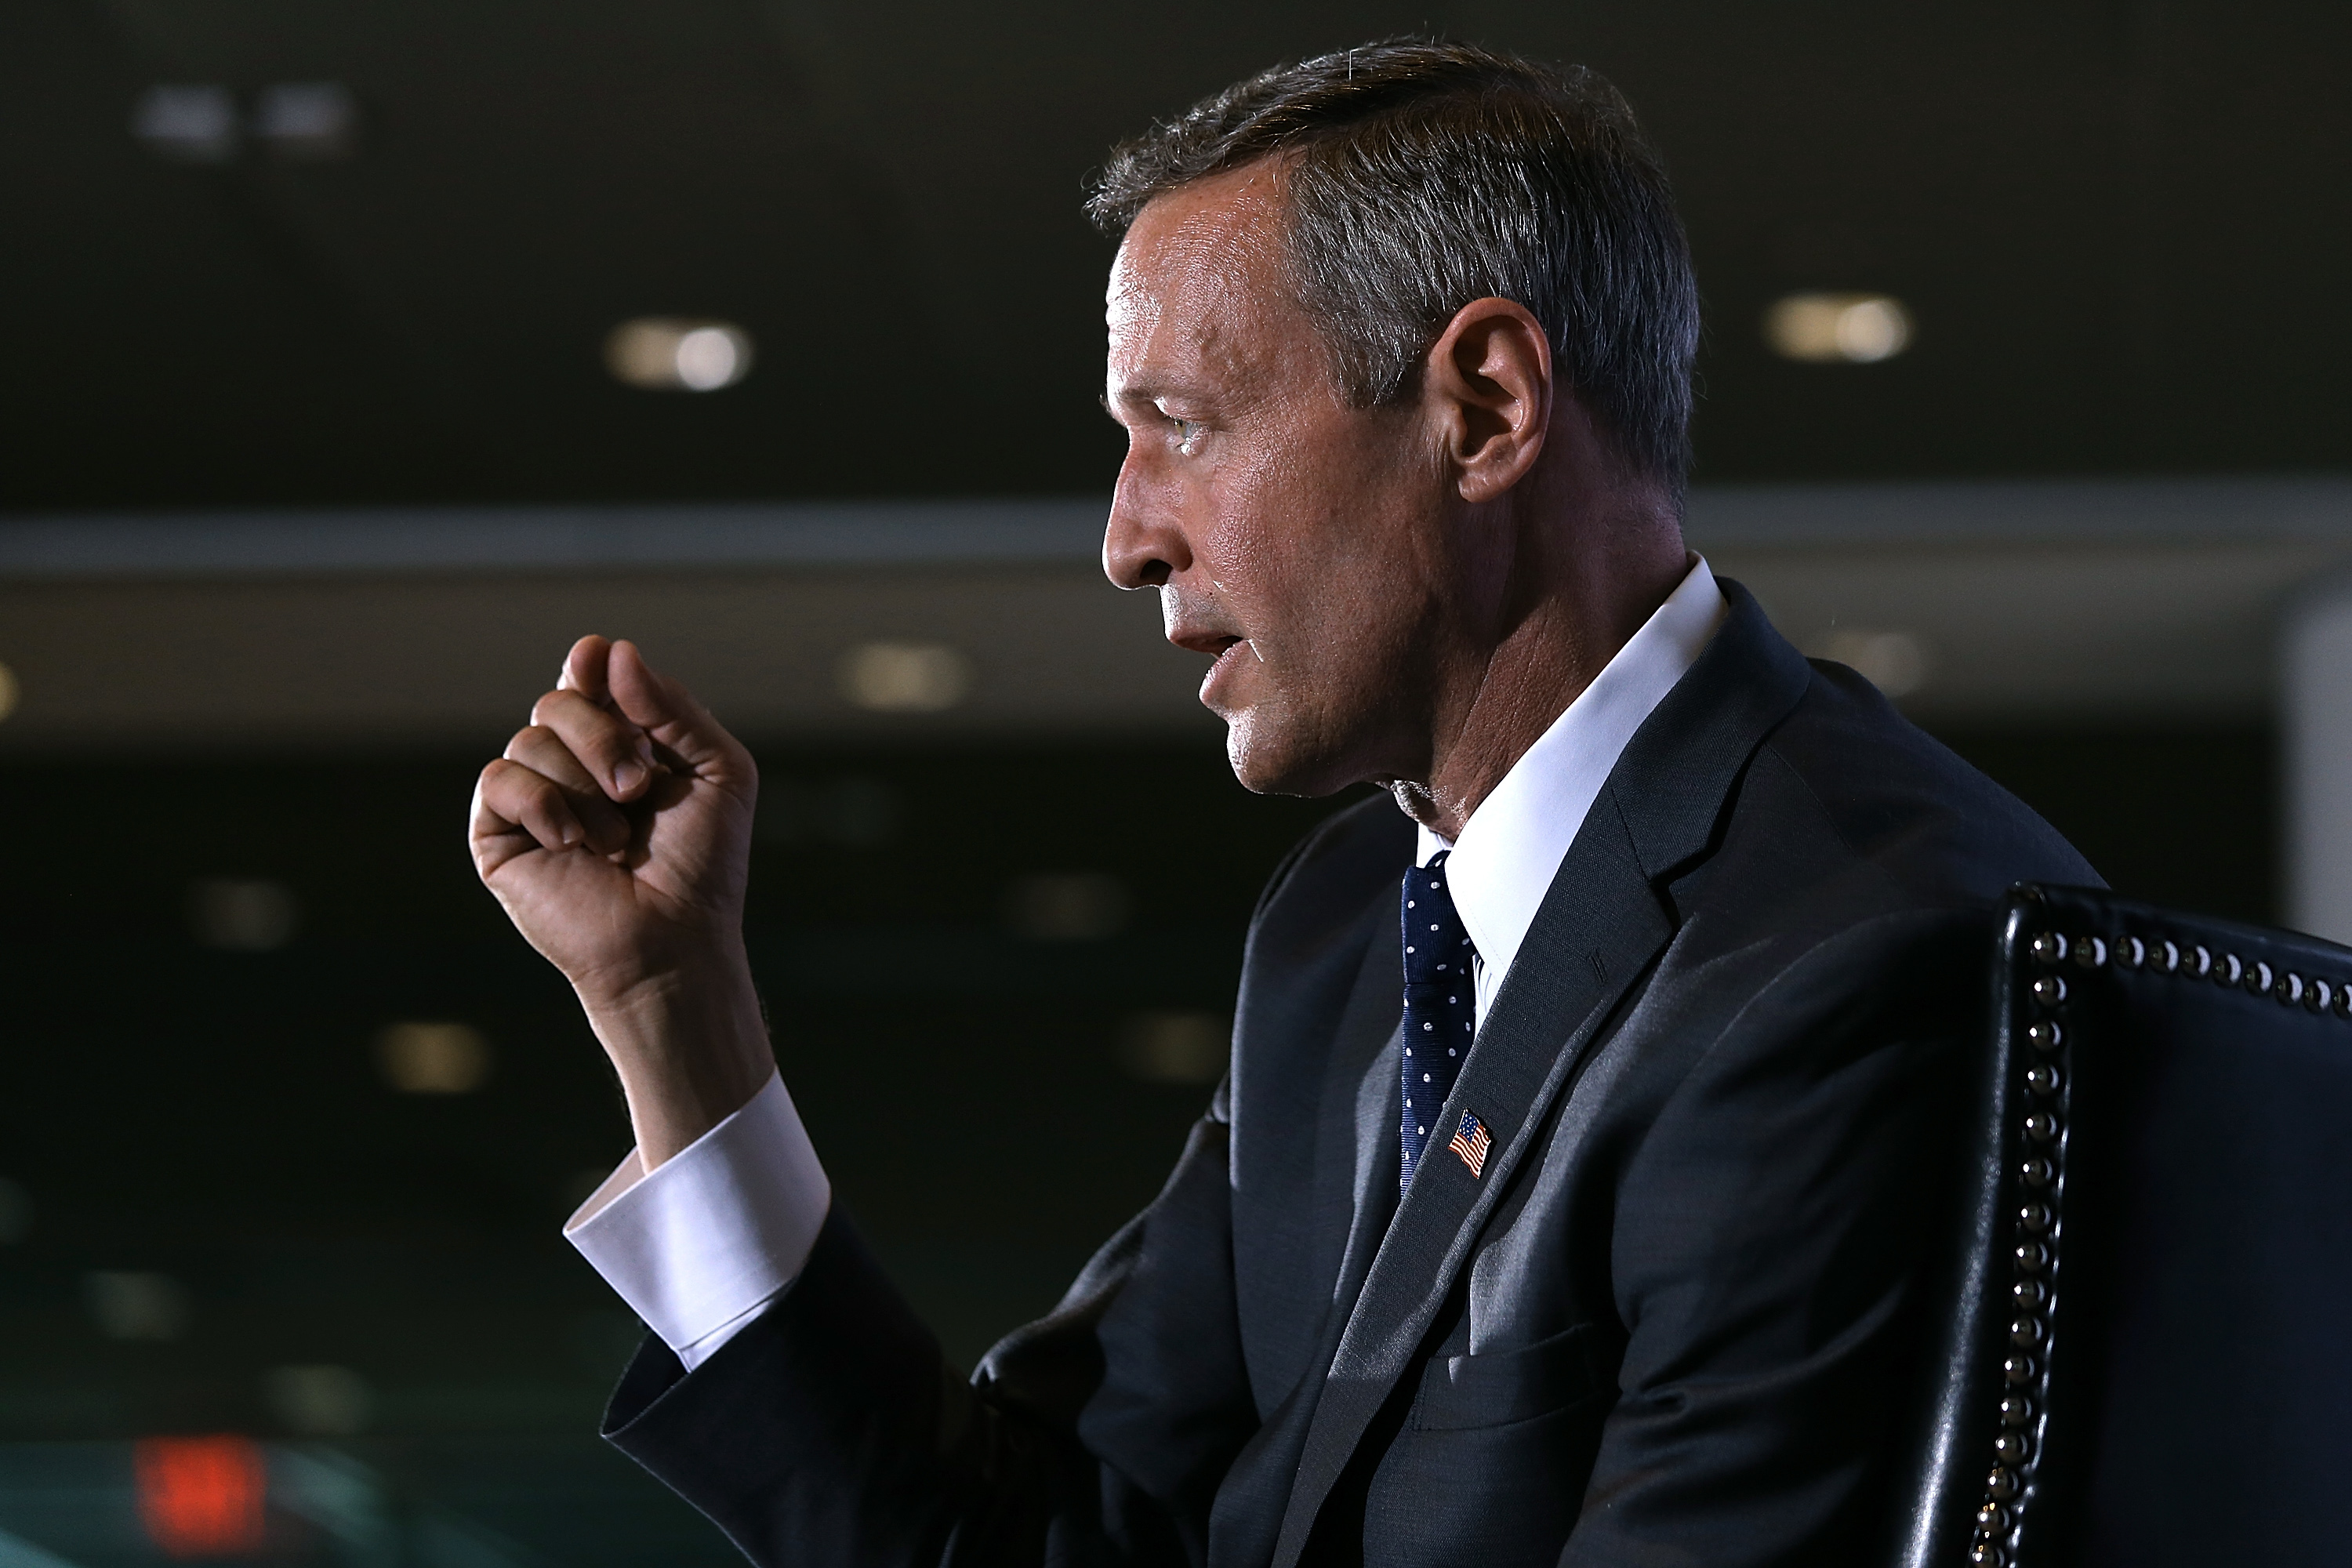 U.S. Democratic presidential candidate and former Maryland Gov. Martin O'Malley speaks at the U.S. Hispanic Chamber of Commerce in Washington, DC. on June 3, 2015.